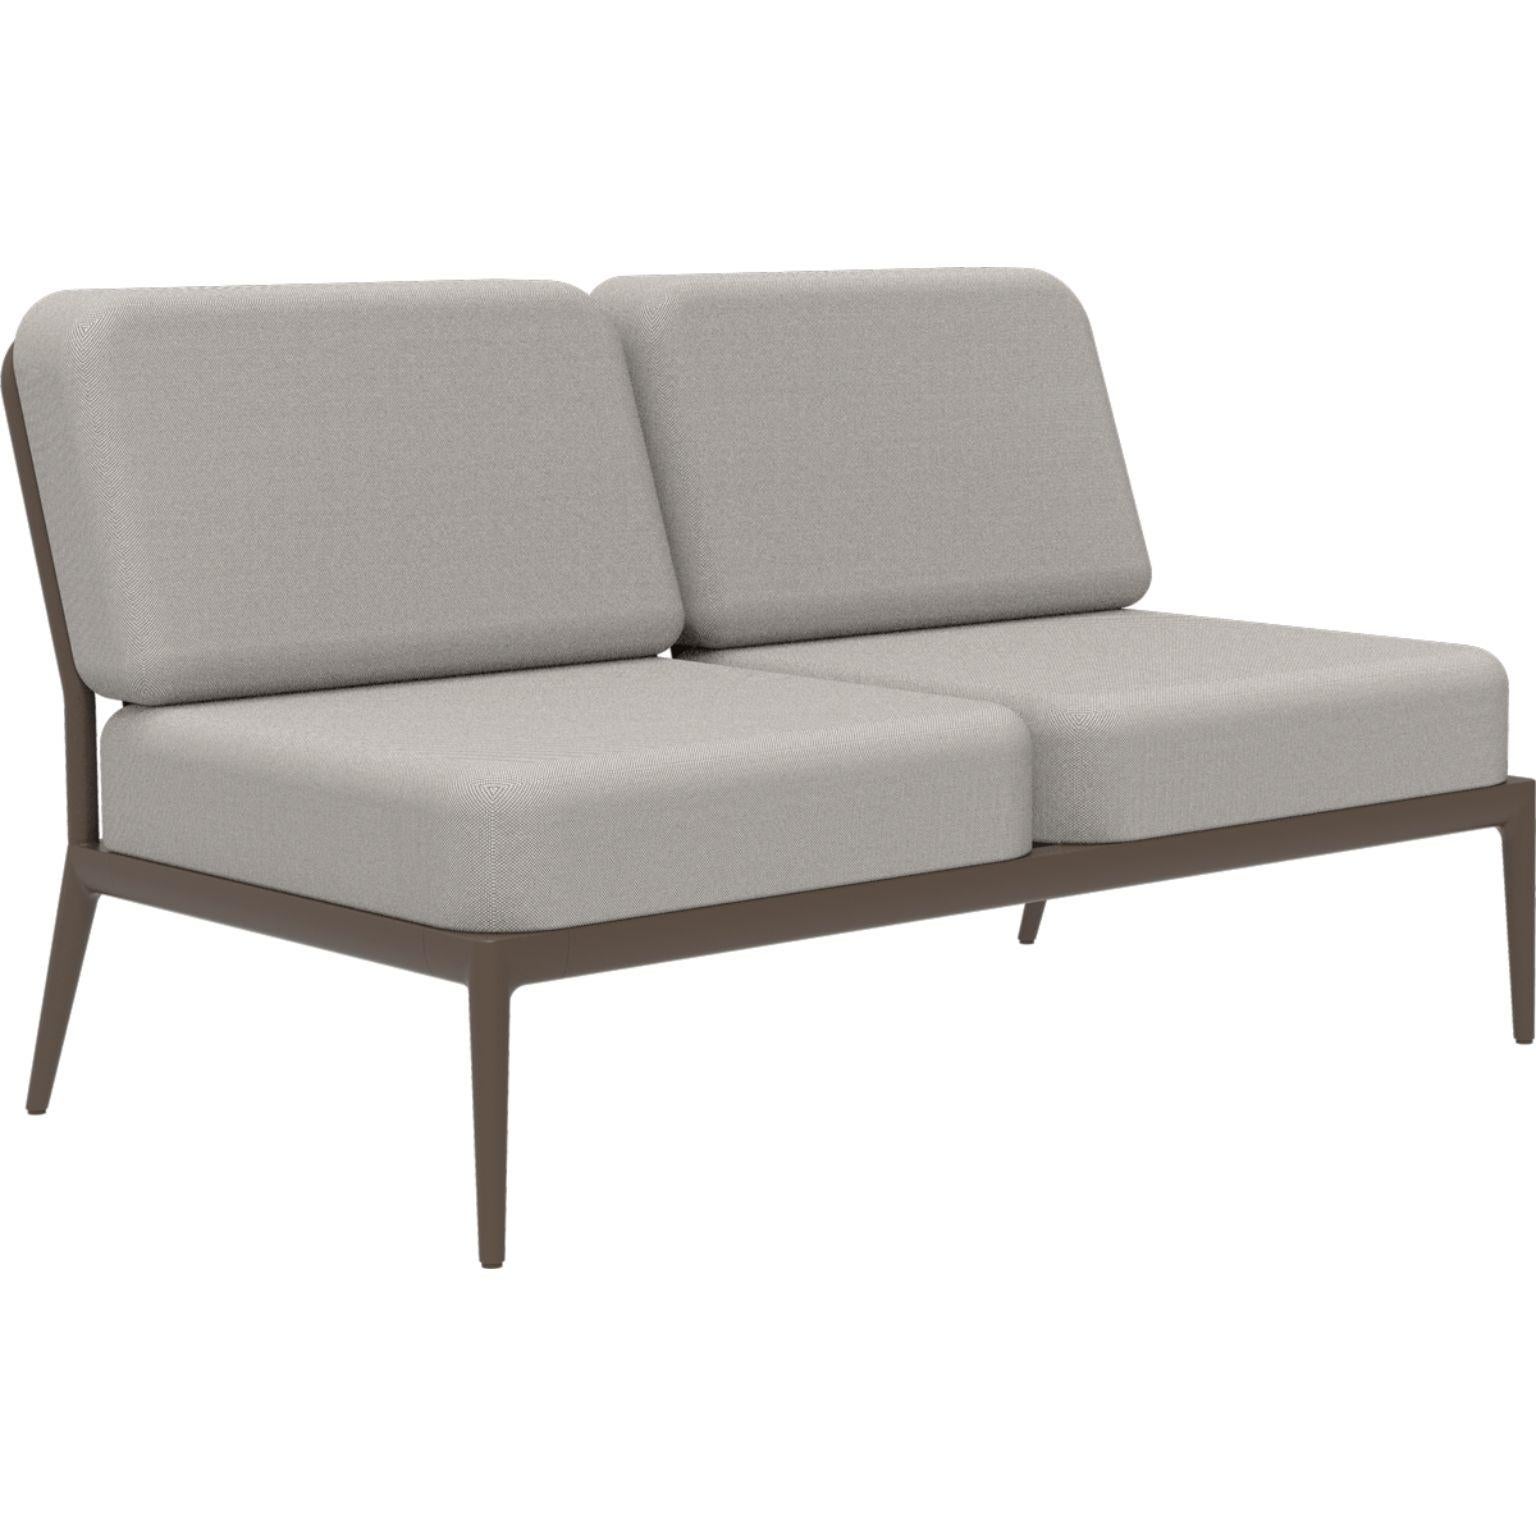 Ribbons Bronze double central modular sofa by MOWEE
Dimensions: D83 x W136 x H81 cm
Material: Aluminum, and upholstery.
Weight: 27 kg.
Also available in different colors and finishes.

An unmistakable collection for its beauty and robustness.